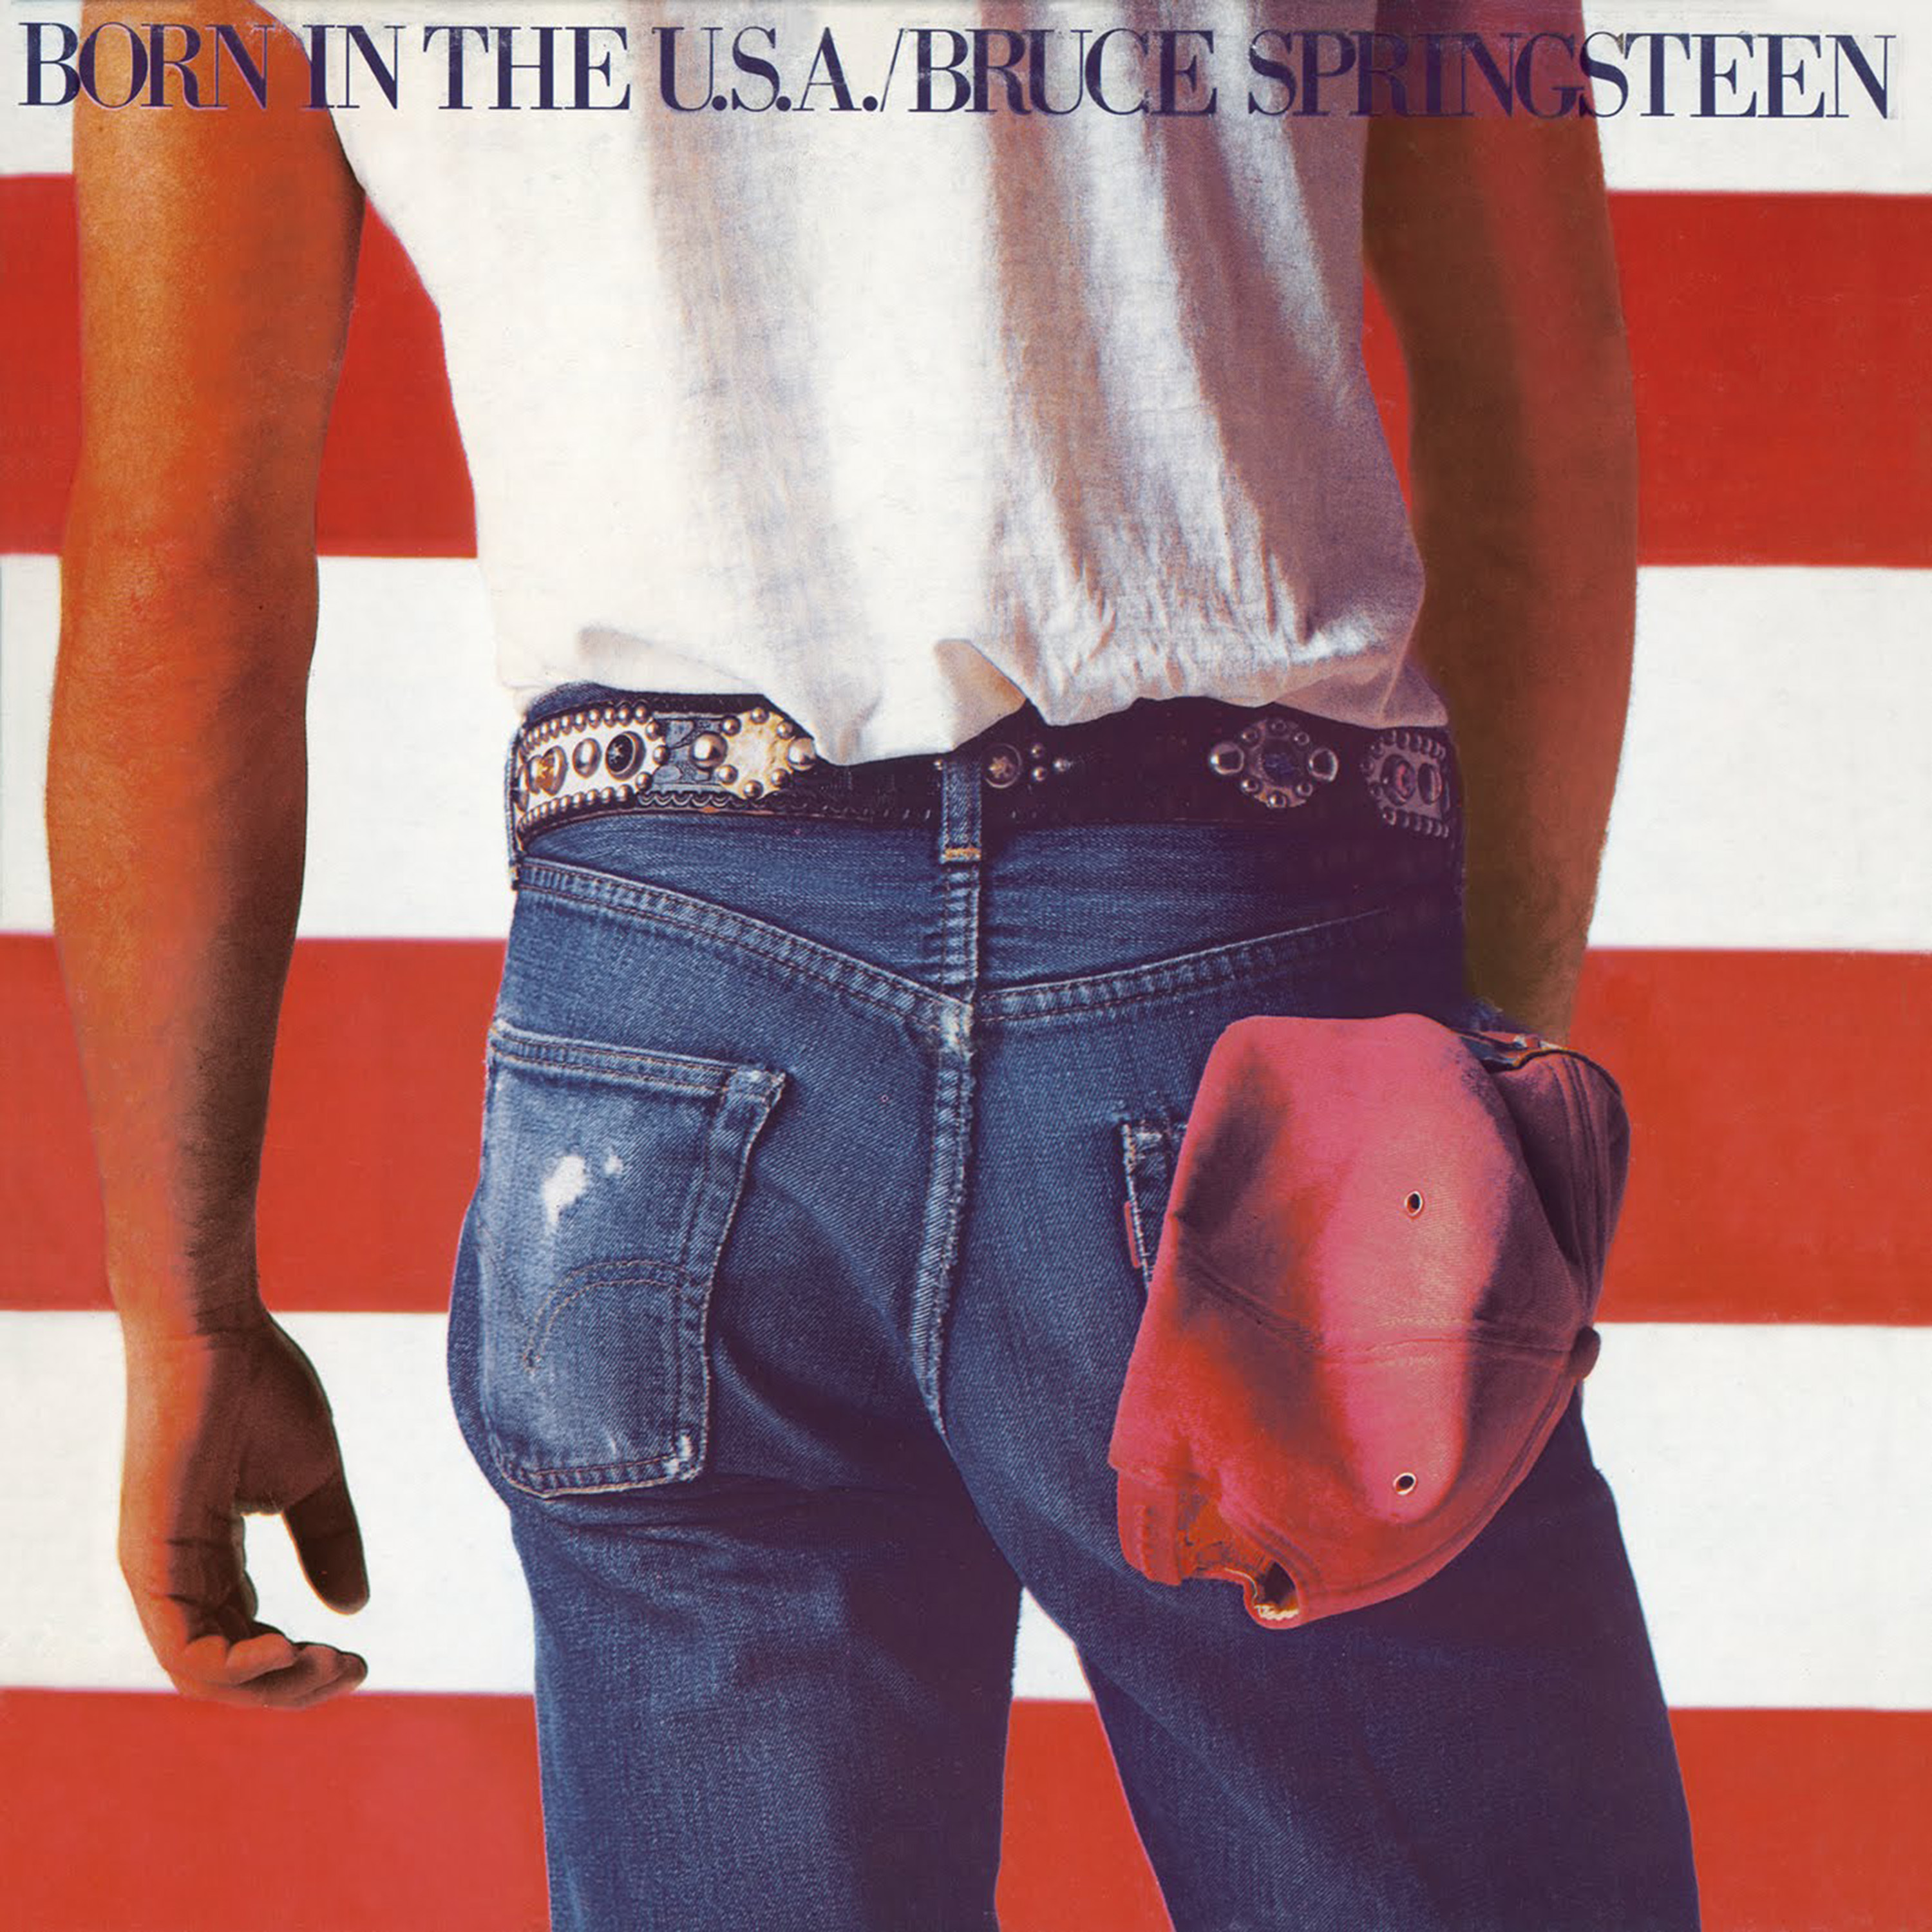 Behind The Song: Bruce Springsteen, “Born In The U.S.A.”